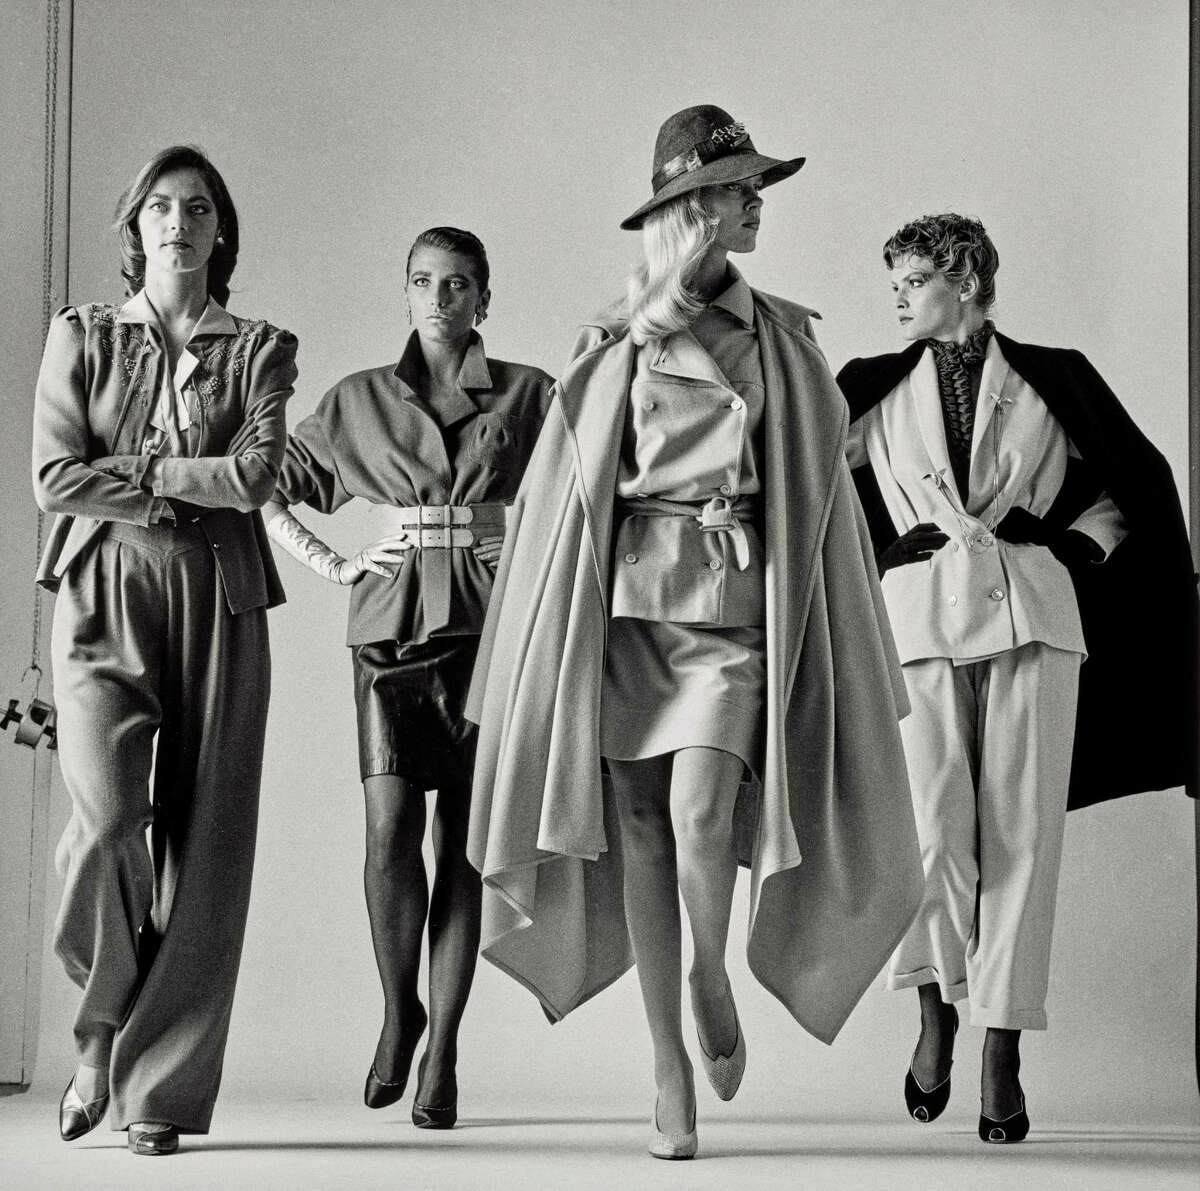 From "Icons of Style: A Century of Fashion Photography," June 23-Sept. 22 at Museum of Fine Arts, Houston: Helmut Newton's "Sie Kommen-Dressed," 1981.